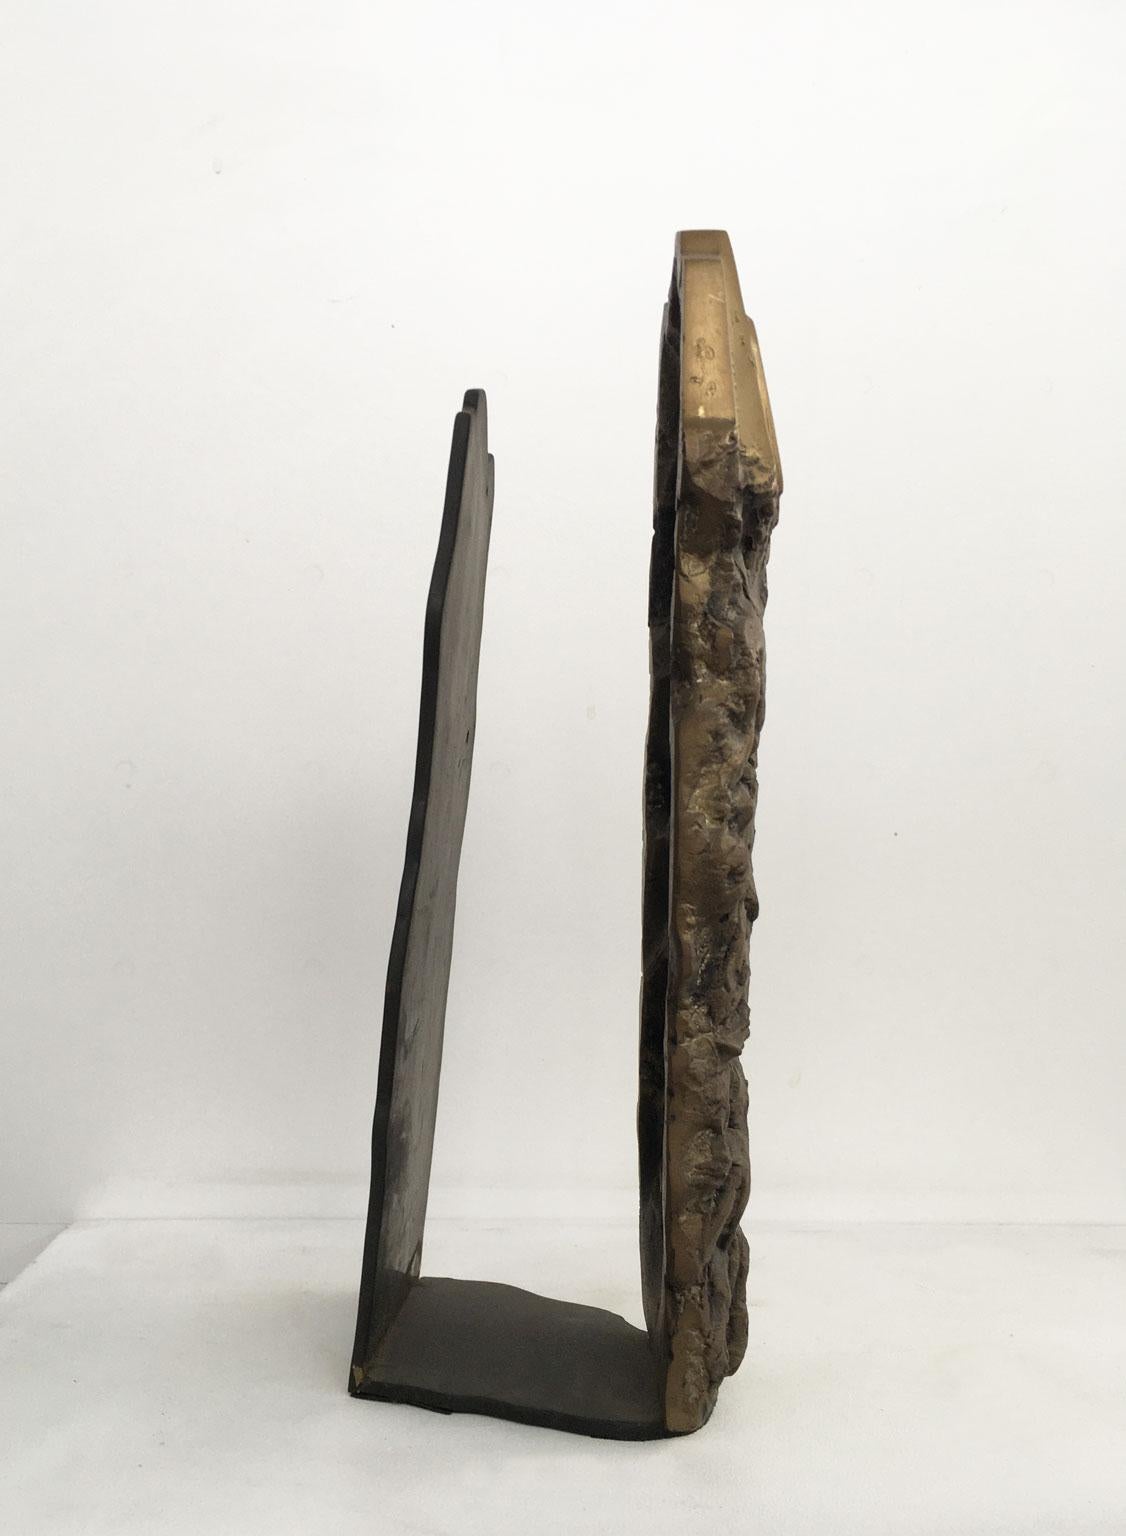 1979 Italy Post-Modern Graziano Pompili Abstract Bronze Sculpture For Sale 4